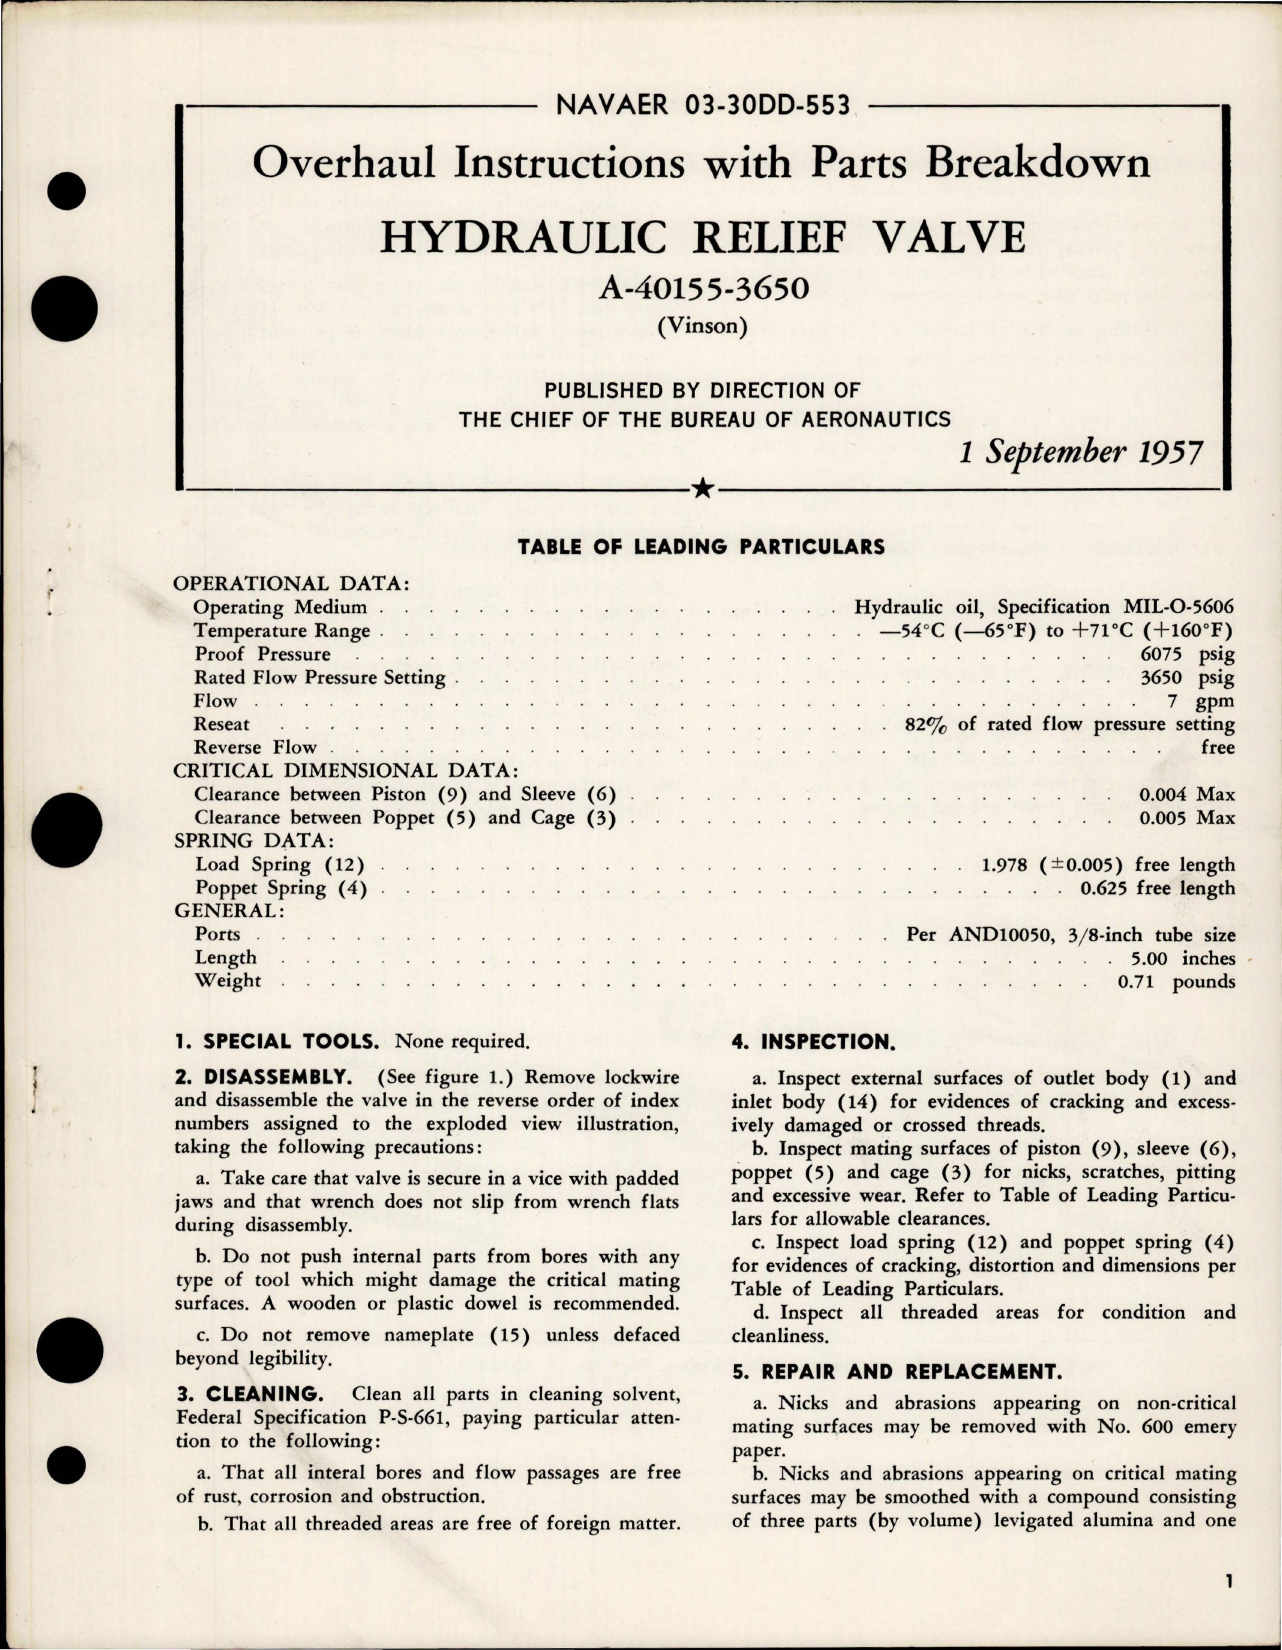 Sample page 1 from AirCorps Library document: Overhaul Instructions with Parts Breakdown for Hydraulic Relief Valve - A-40155-3650 